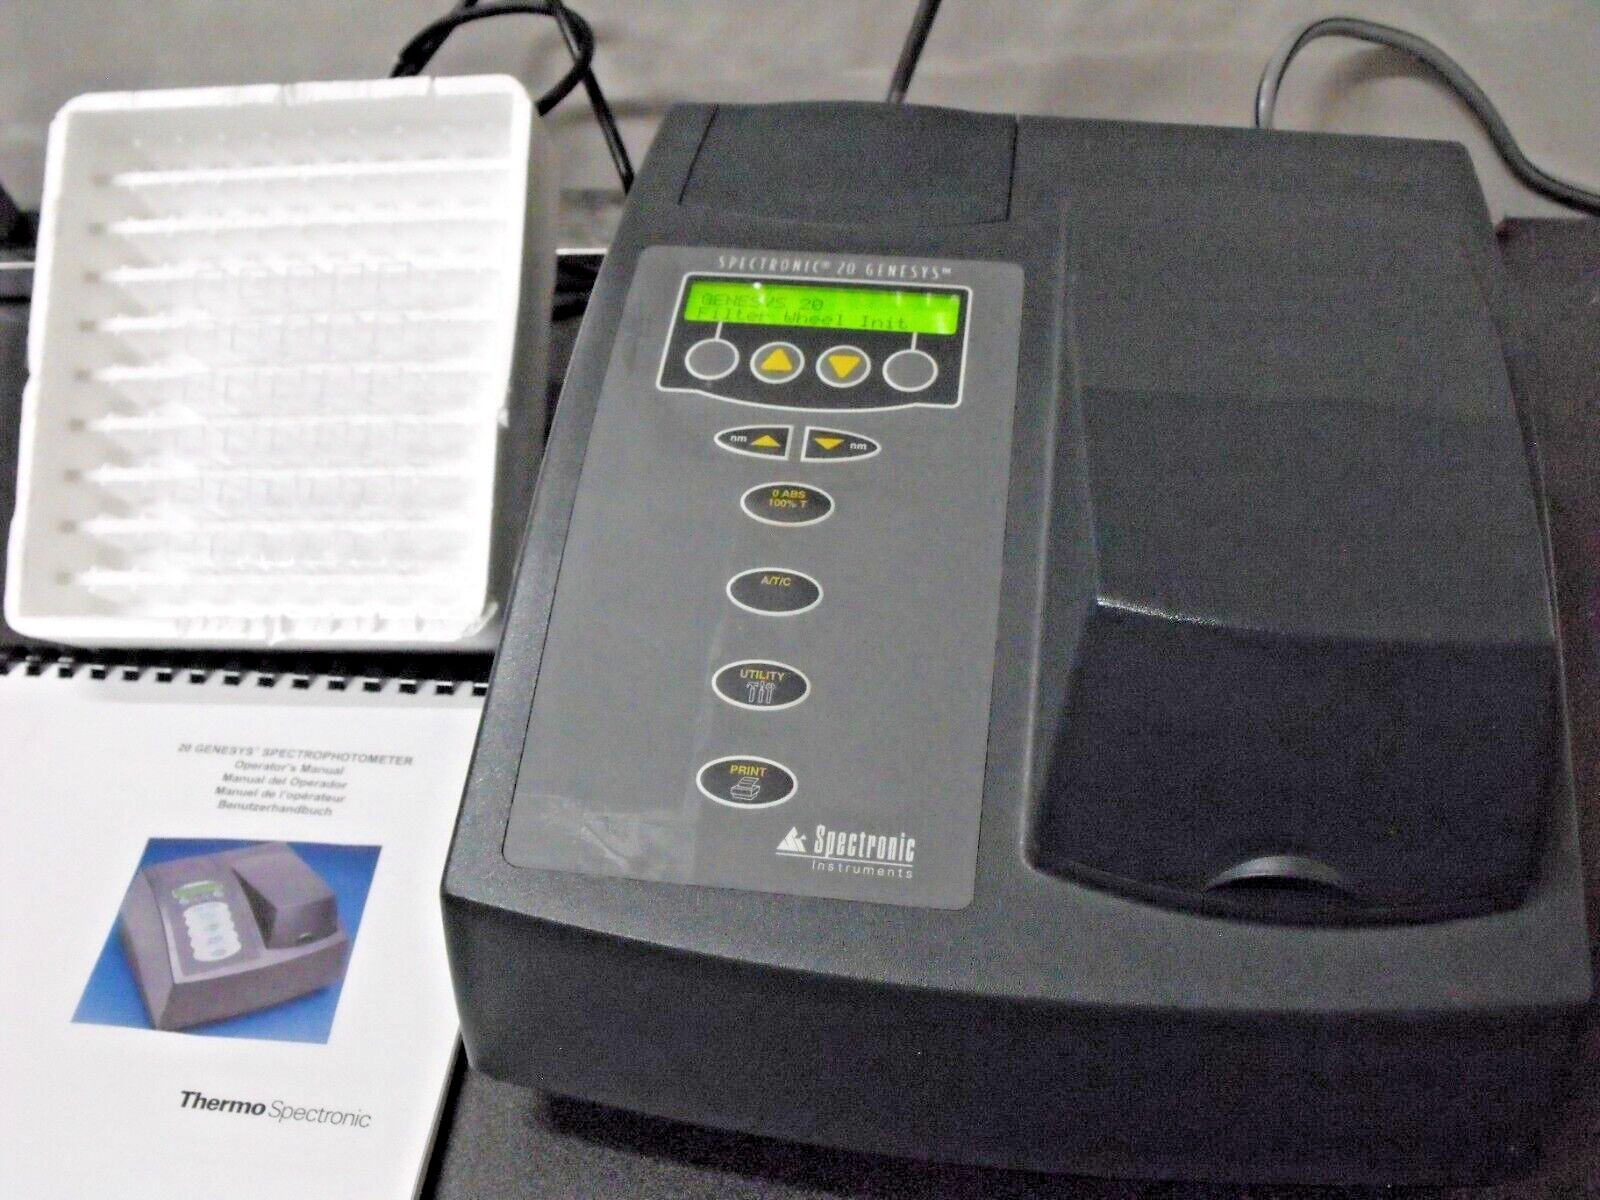 THERMO FISHER SPECTRONIC GENESYS 20 SPECTROPHOTOMETER 4001/4 w/ CUVETTES MANUAL